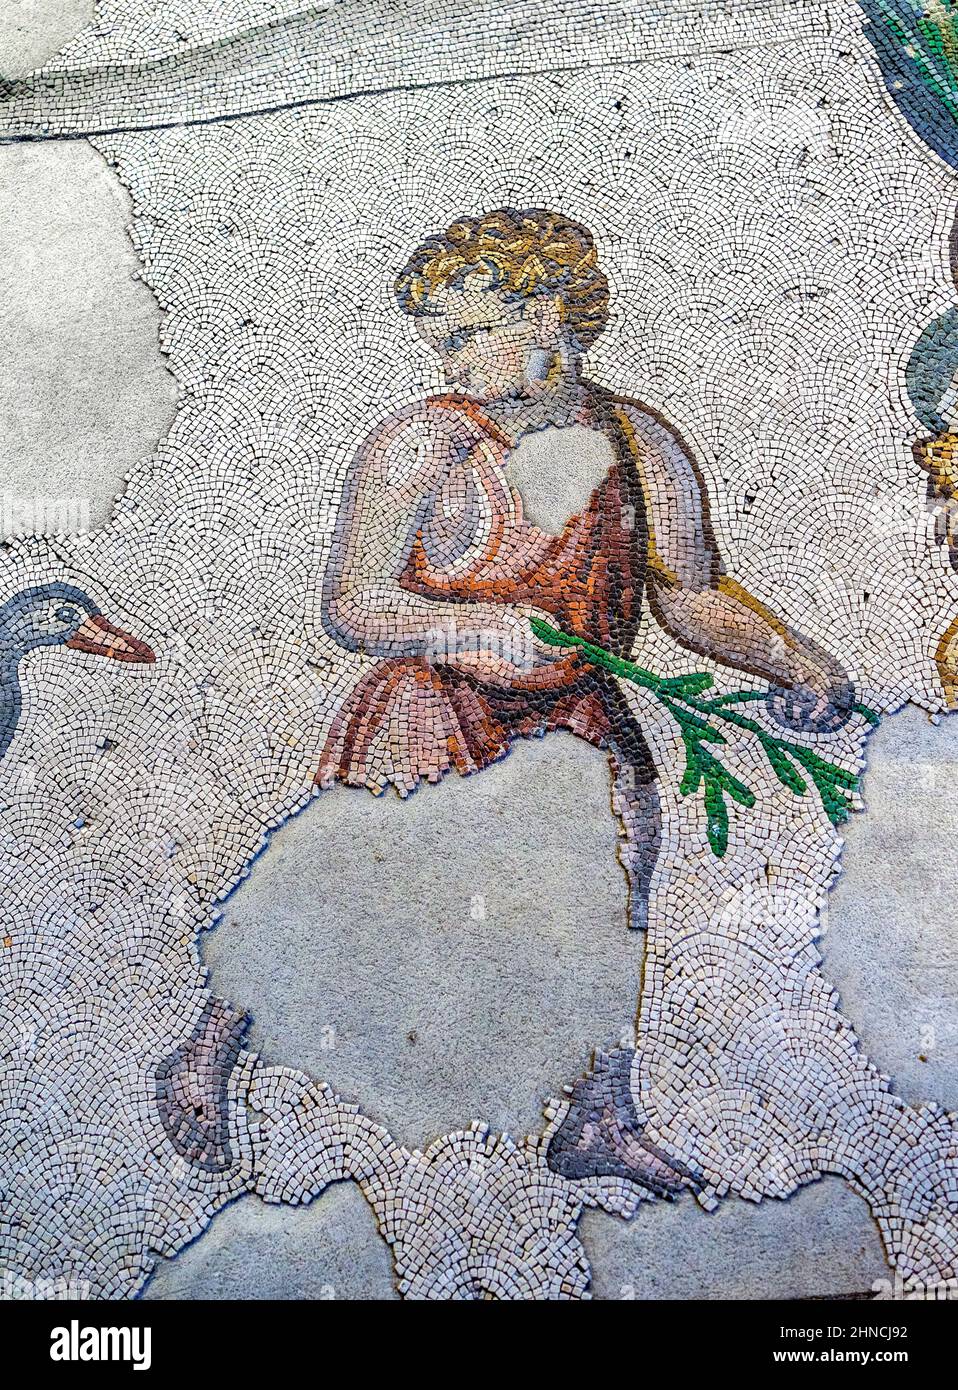 Mosaic work of a girl from the Byzantine period (East Roman period) at Great Palace of Constantinople. 4th-6th century. Great Palace Mosaics Museum. Stock Photo